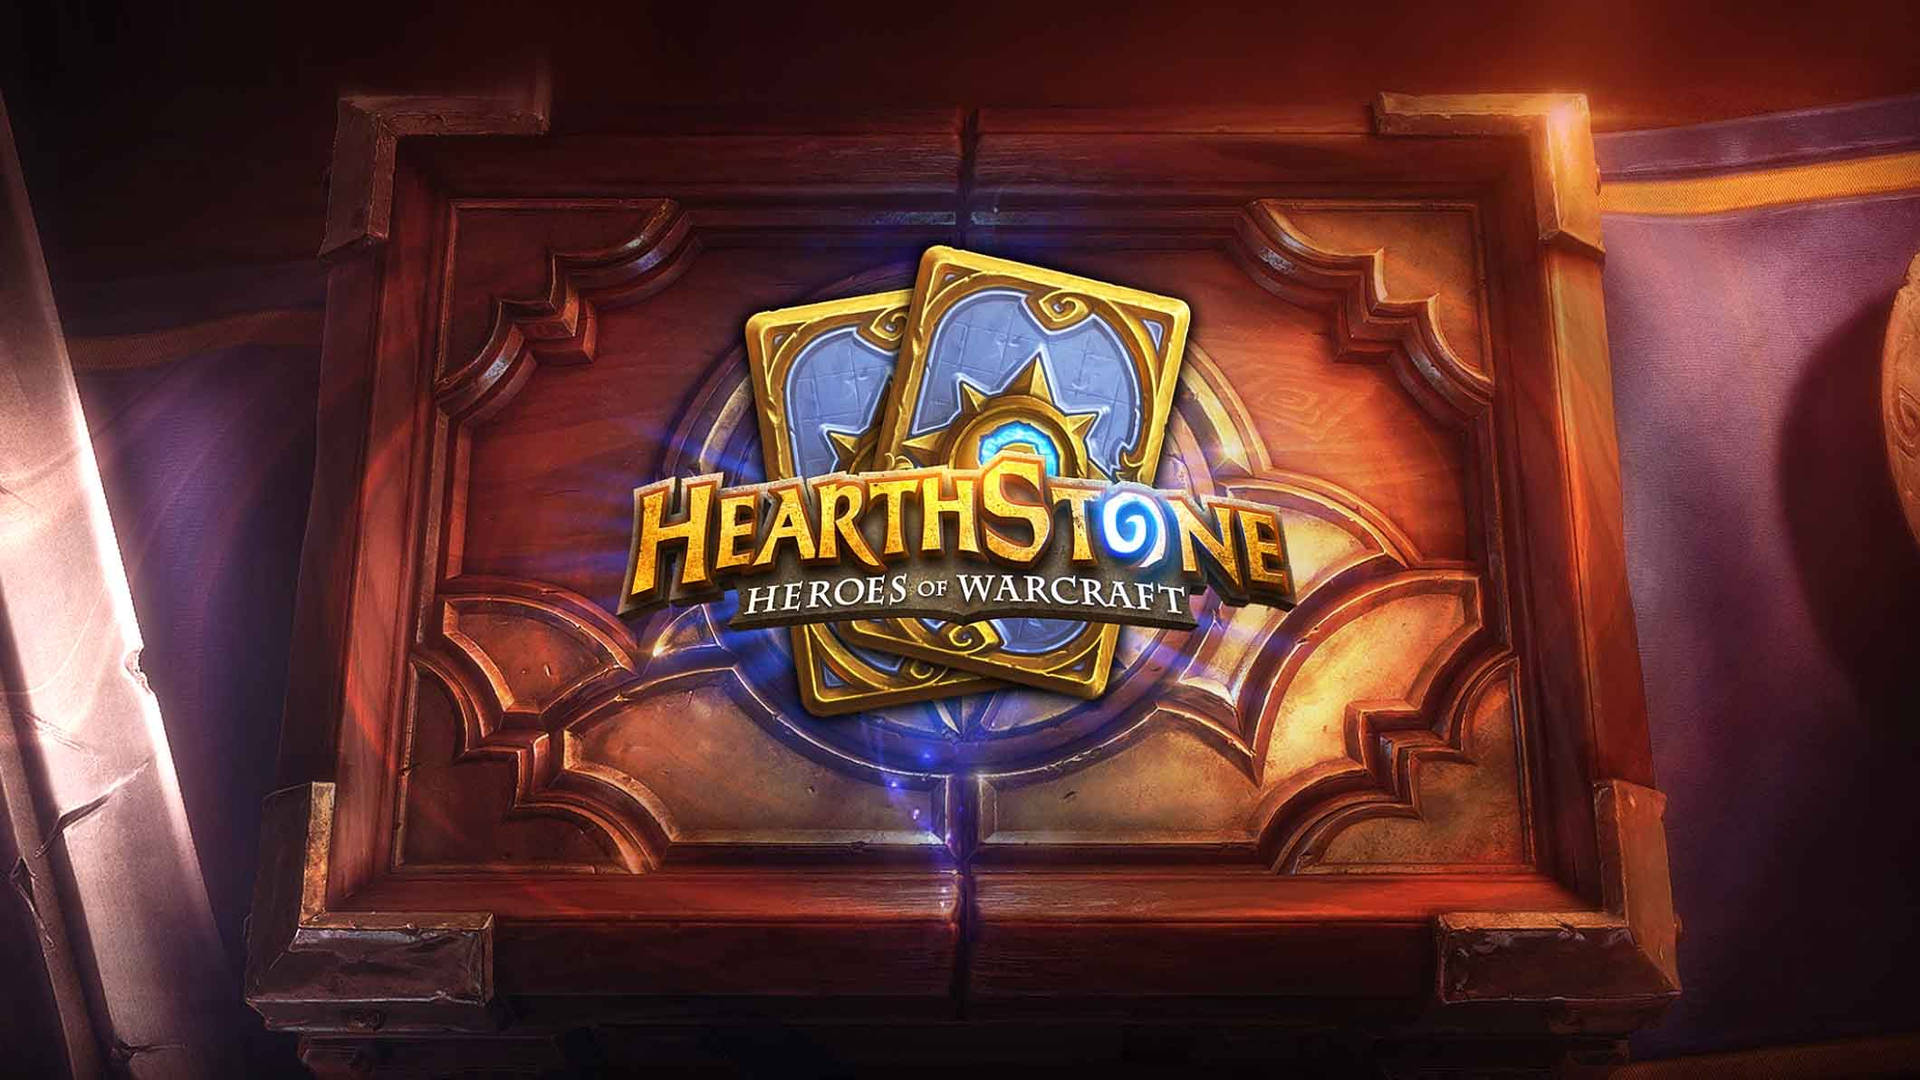 Legendary Hearthstone Card Game In Action Background